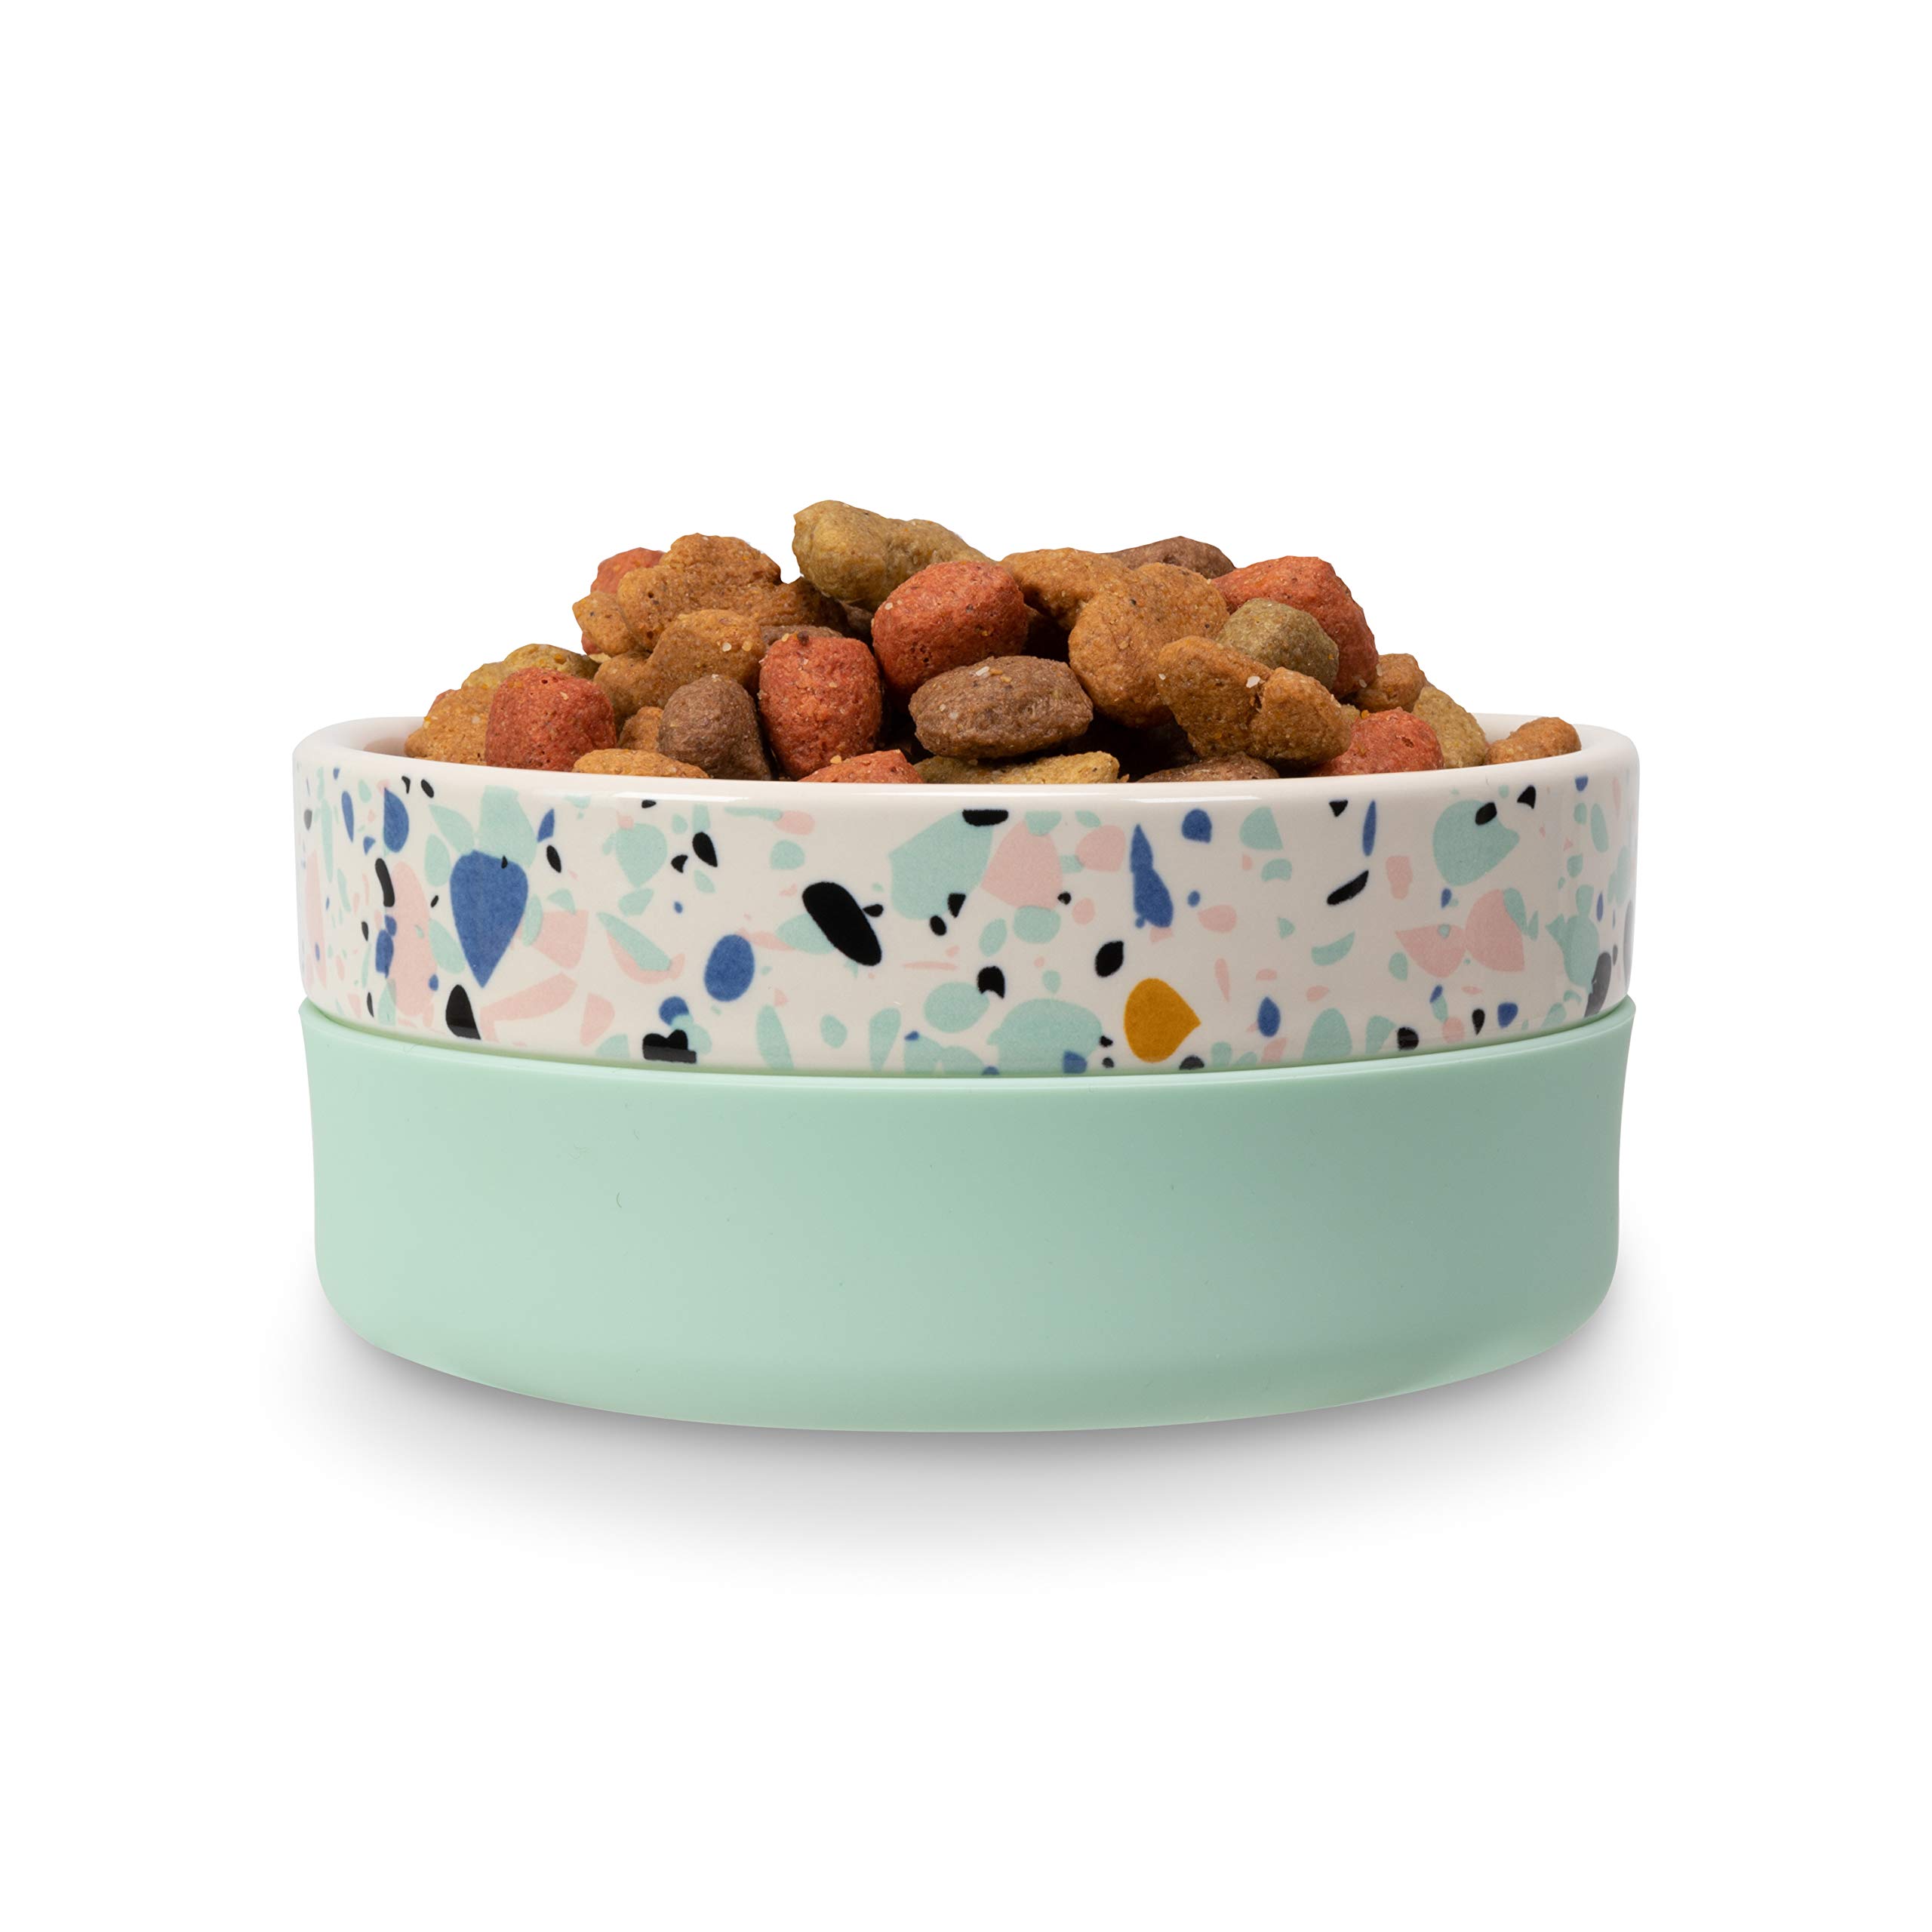 Jonathan Adler: Now House Mint Terrazzo Bowl, Small or Medium - Now House  for Pets Ceramic Dog Bowl - Ceramic Dog Food Bowl, Dog Accessories, Pet  Supplies, Dog Water Bowl, Puppy Bowls